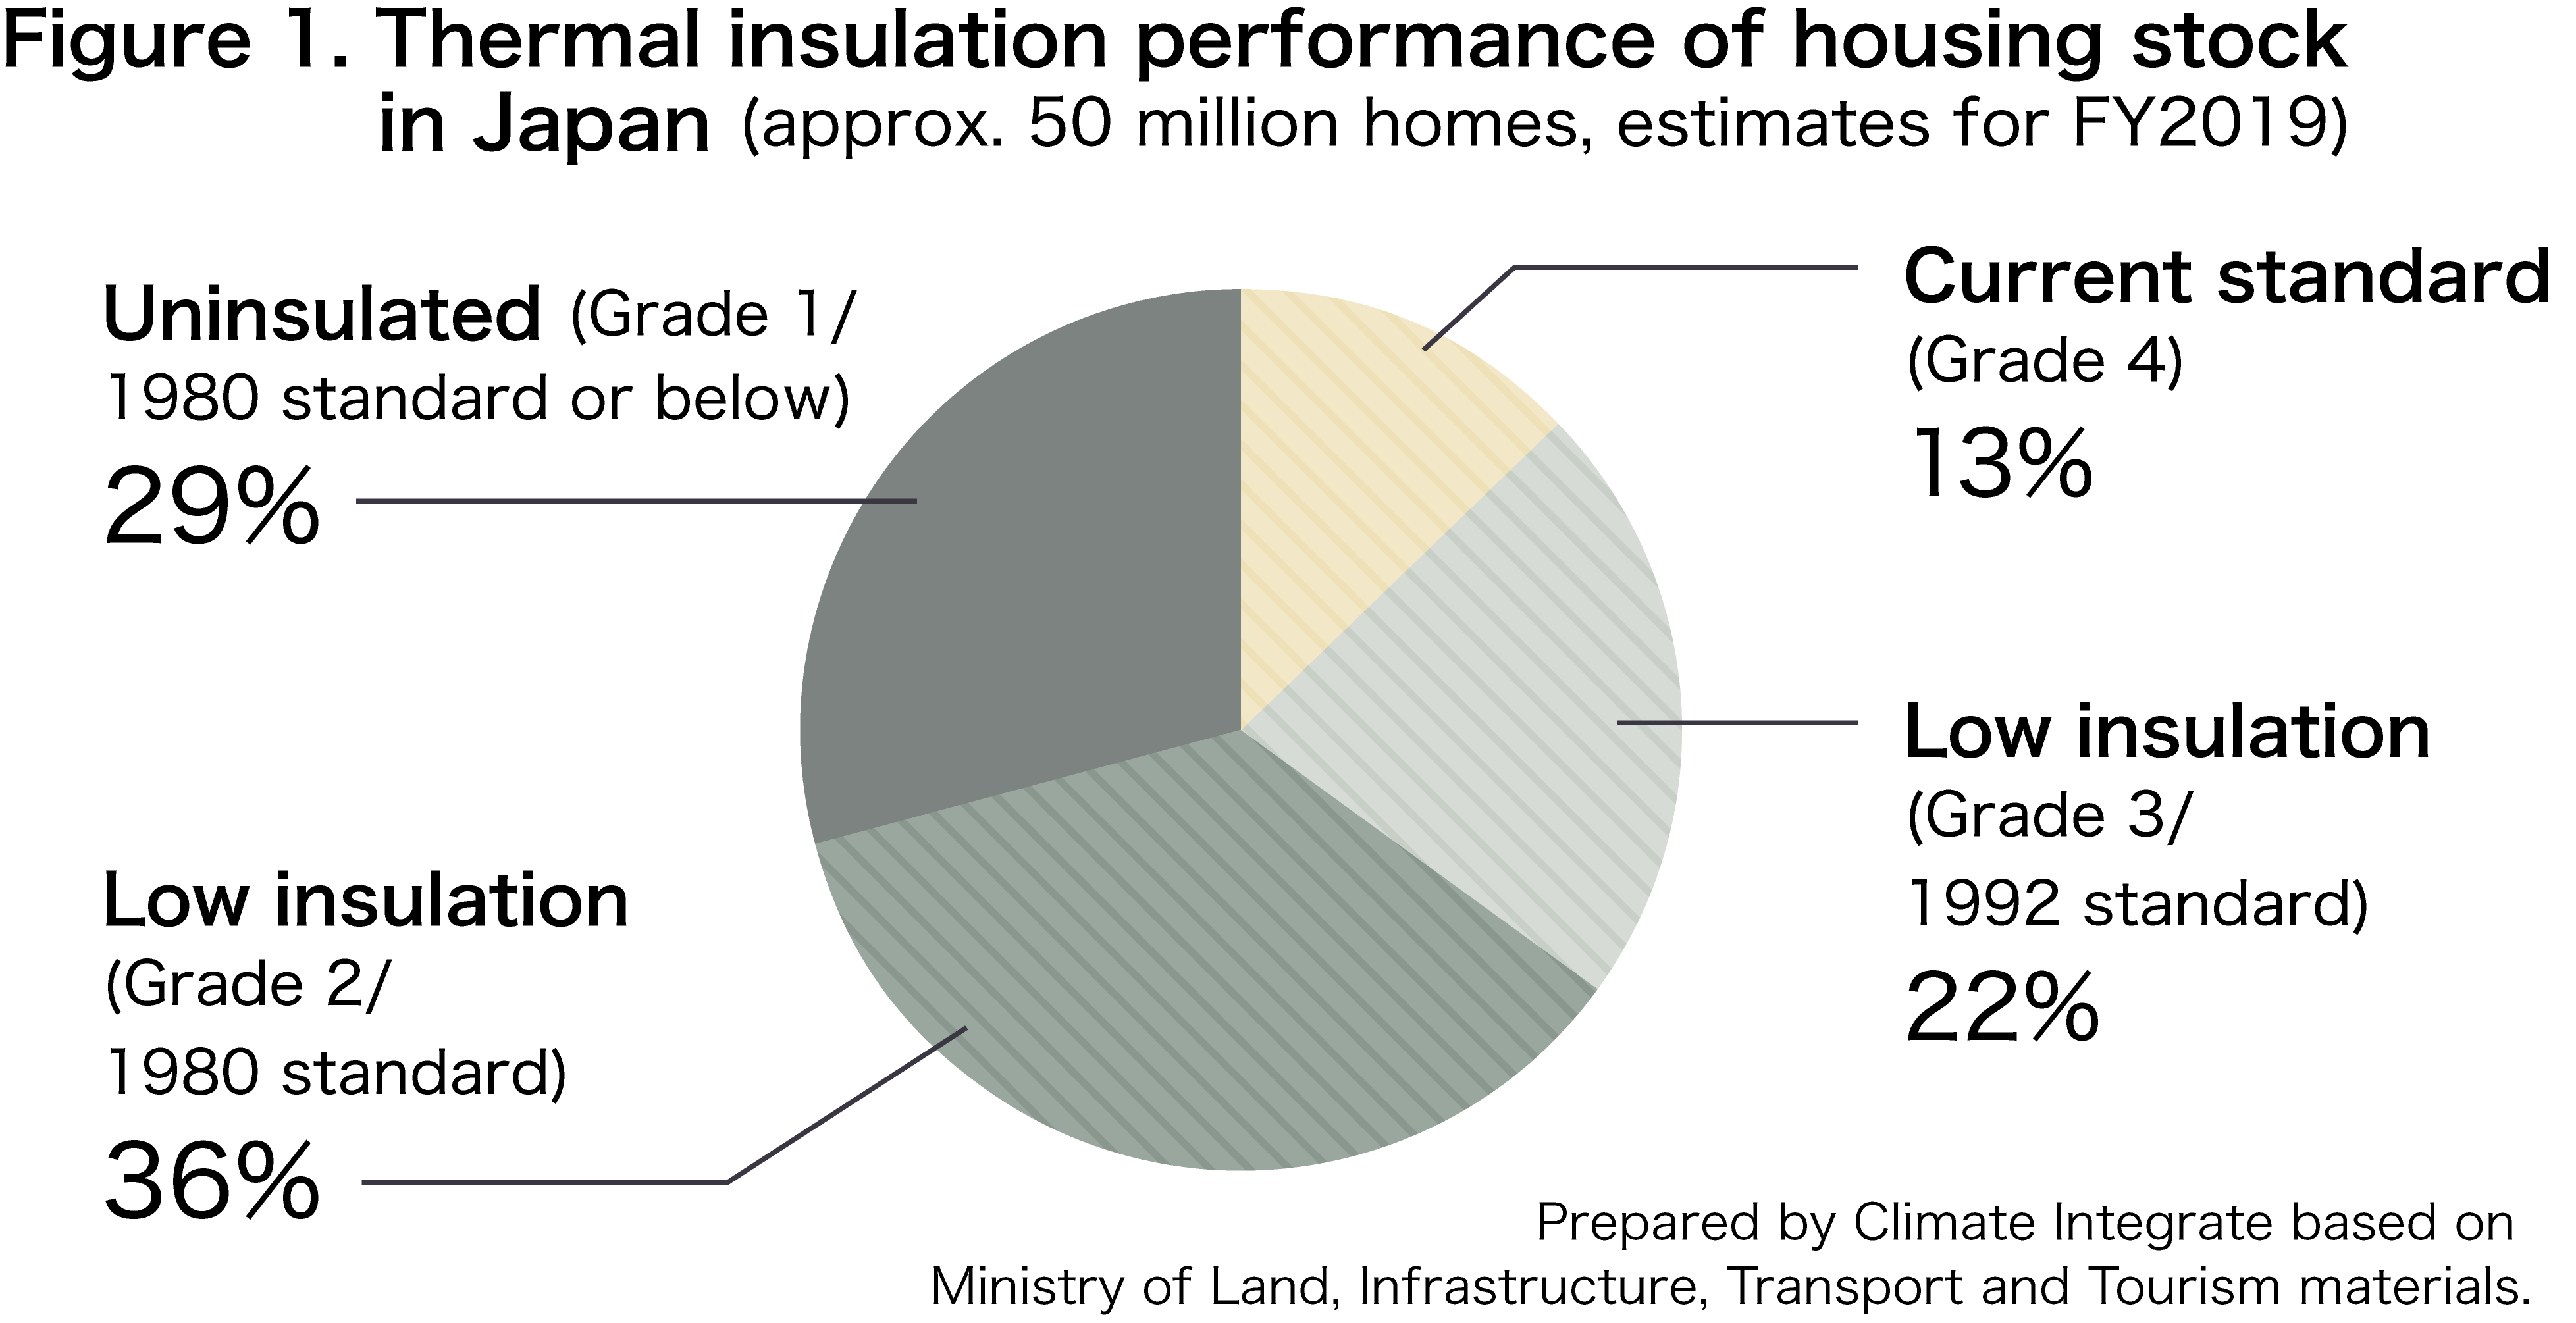 Figure 1. Thermal insulation performance of housing stock in Japan